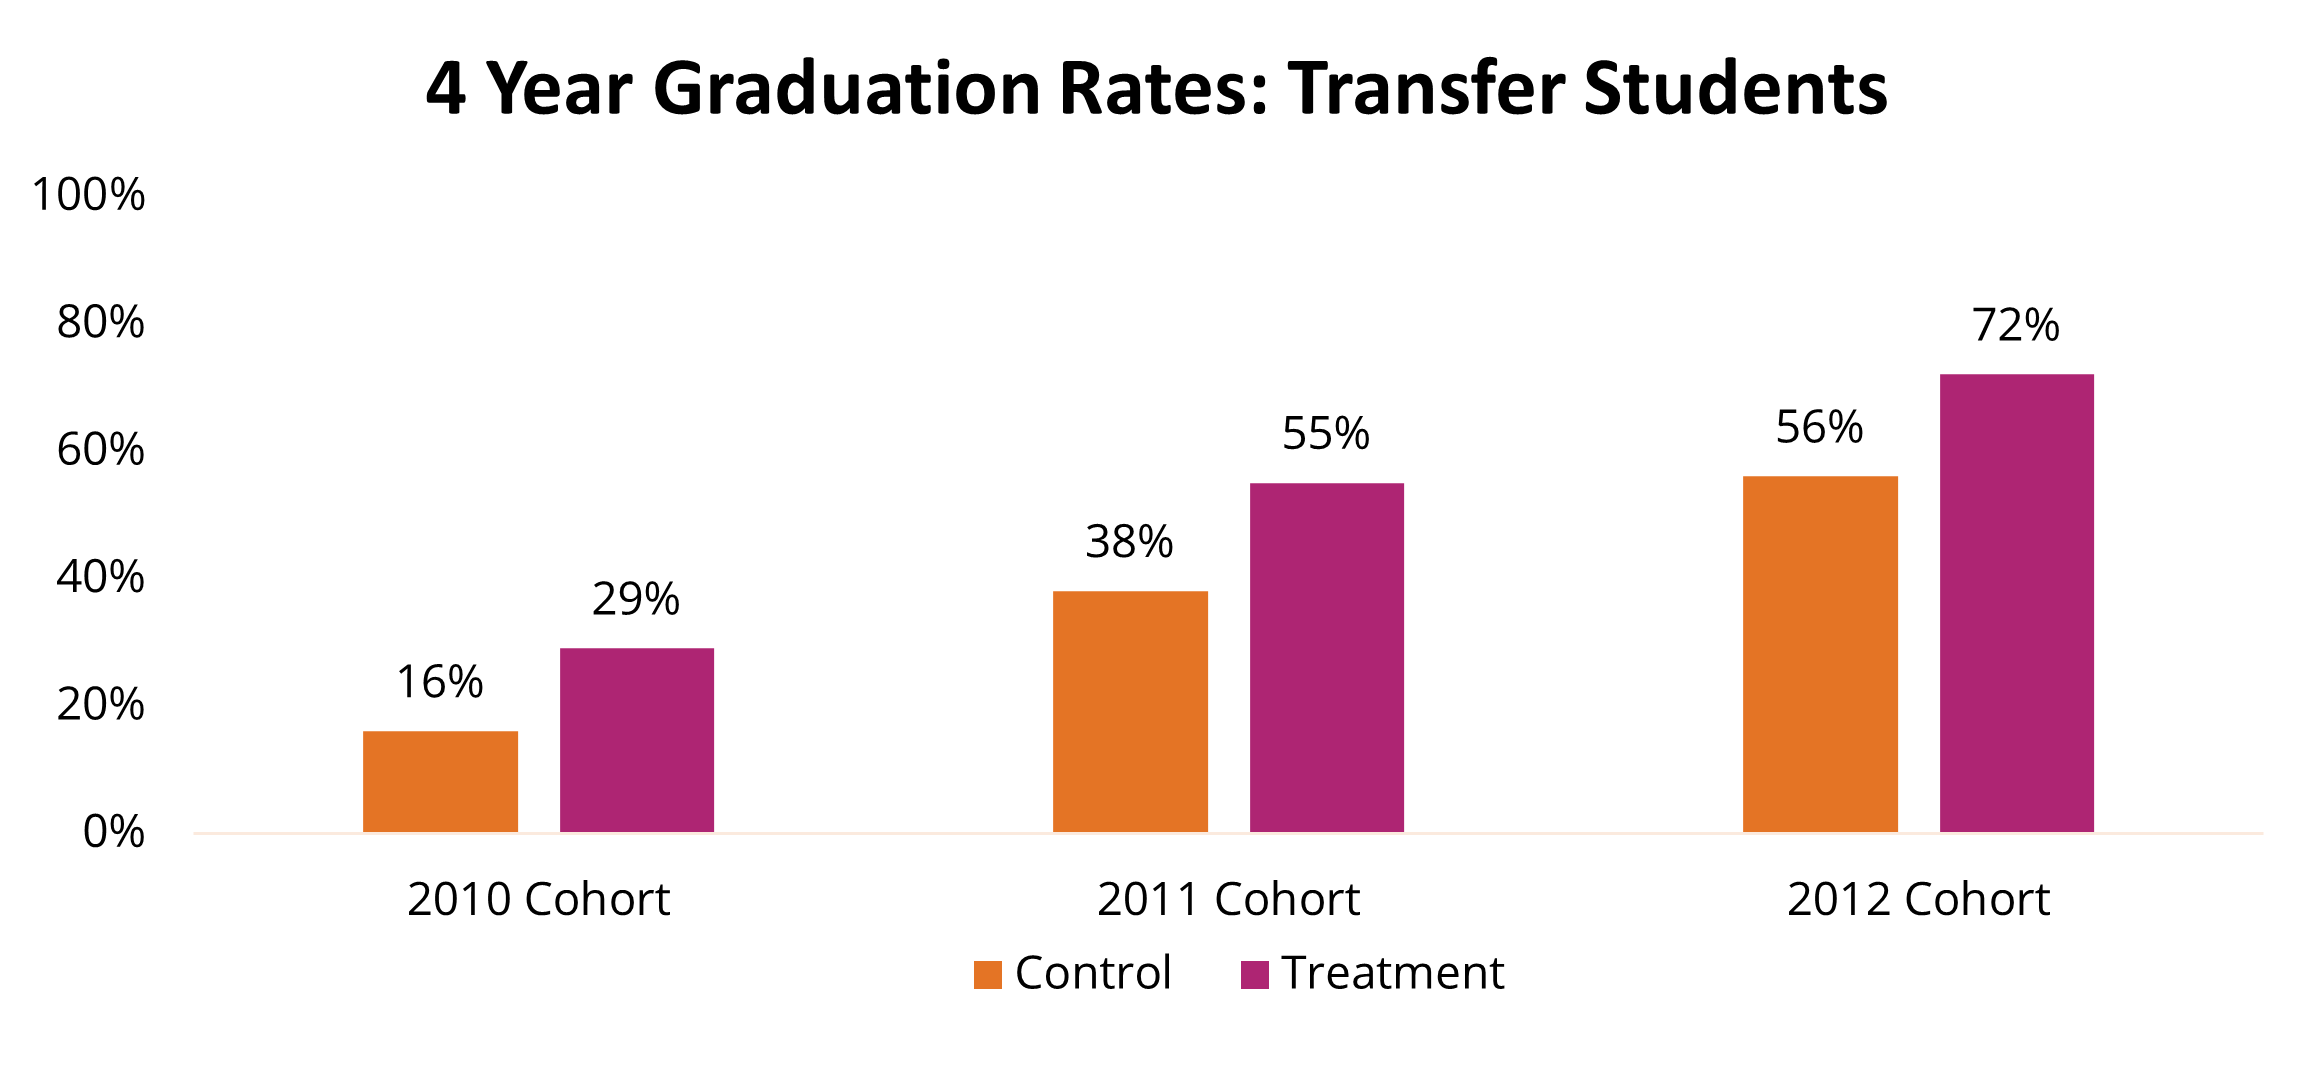 Chart showing 4 Year Graduation Rates of Transfer Students